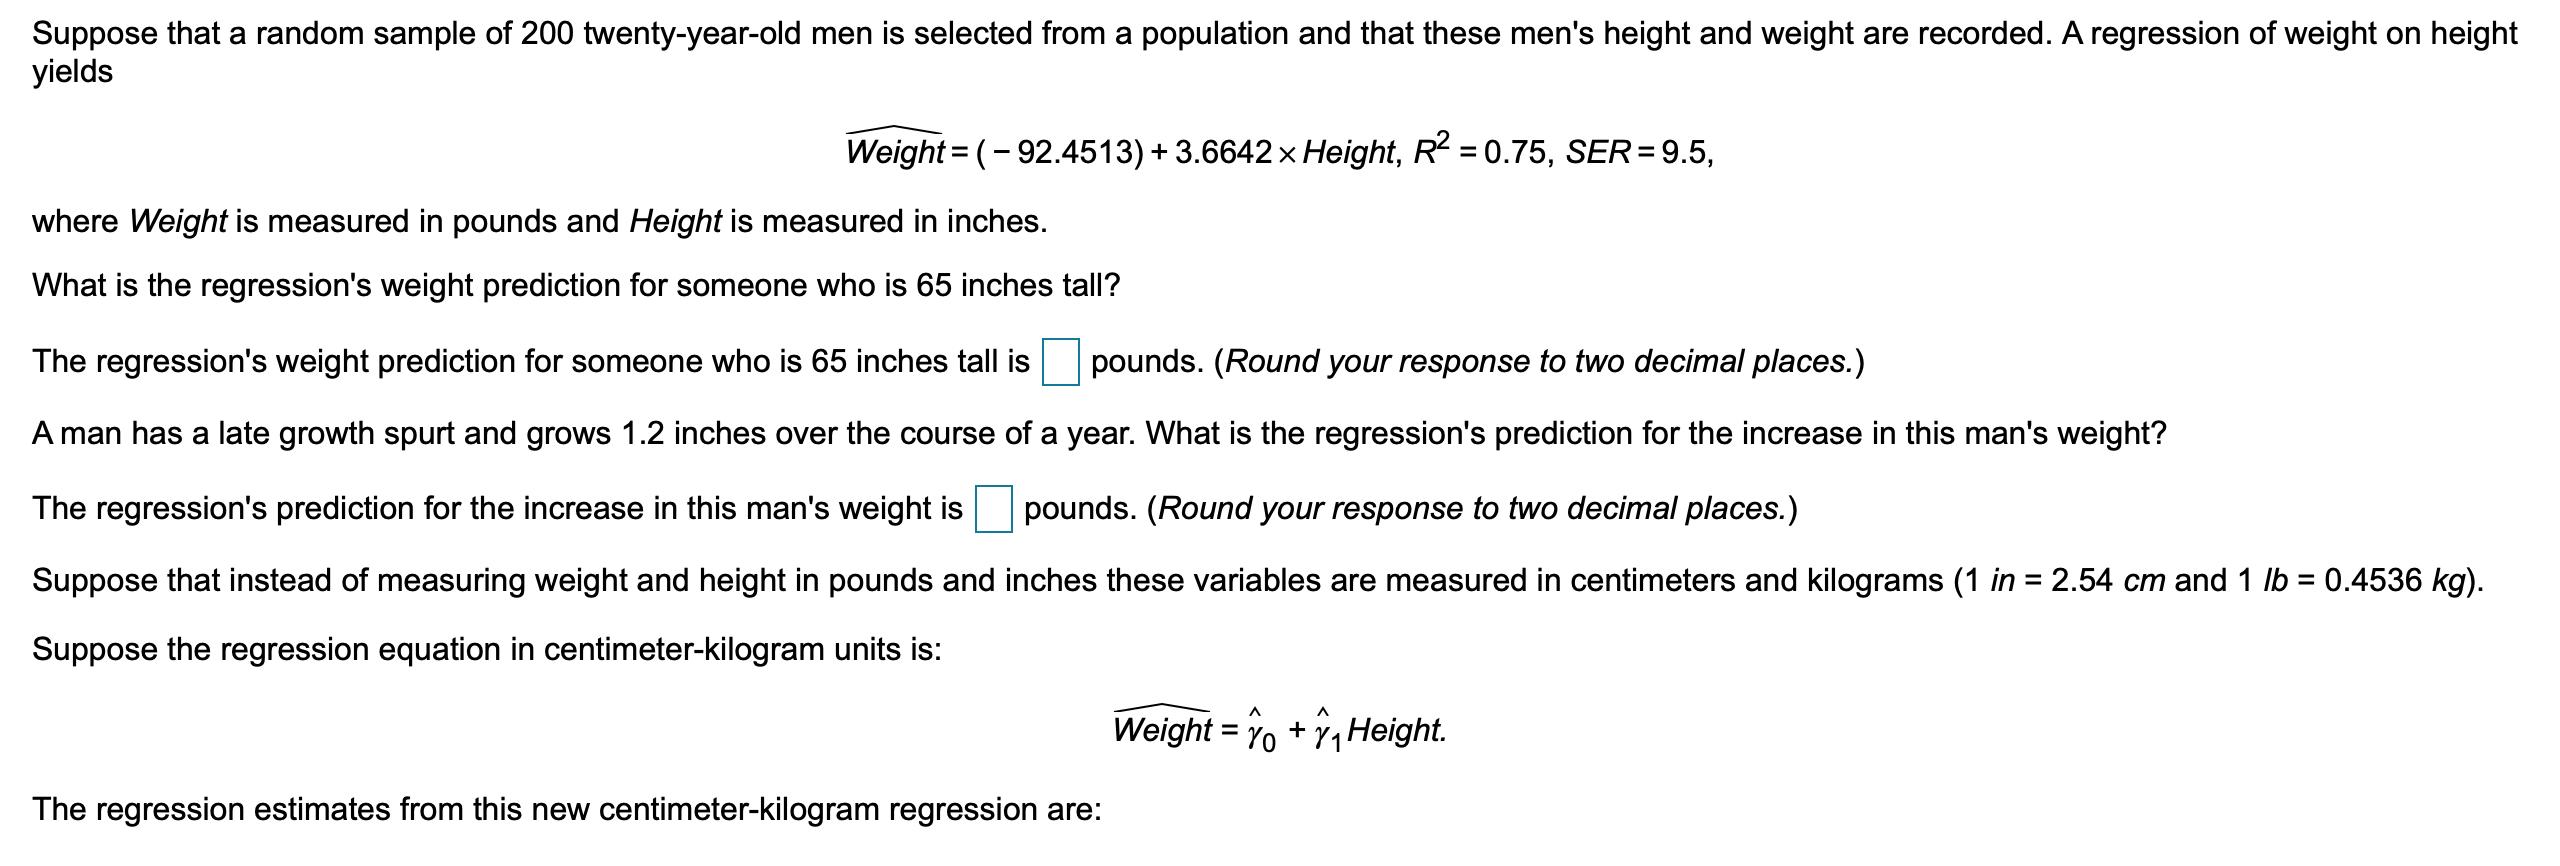 Suppose that a random sample of 200 twenty-year-old men is selected from a population and that these mens height and weight